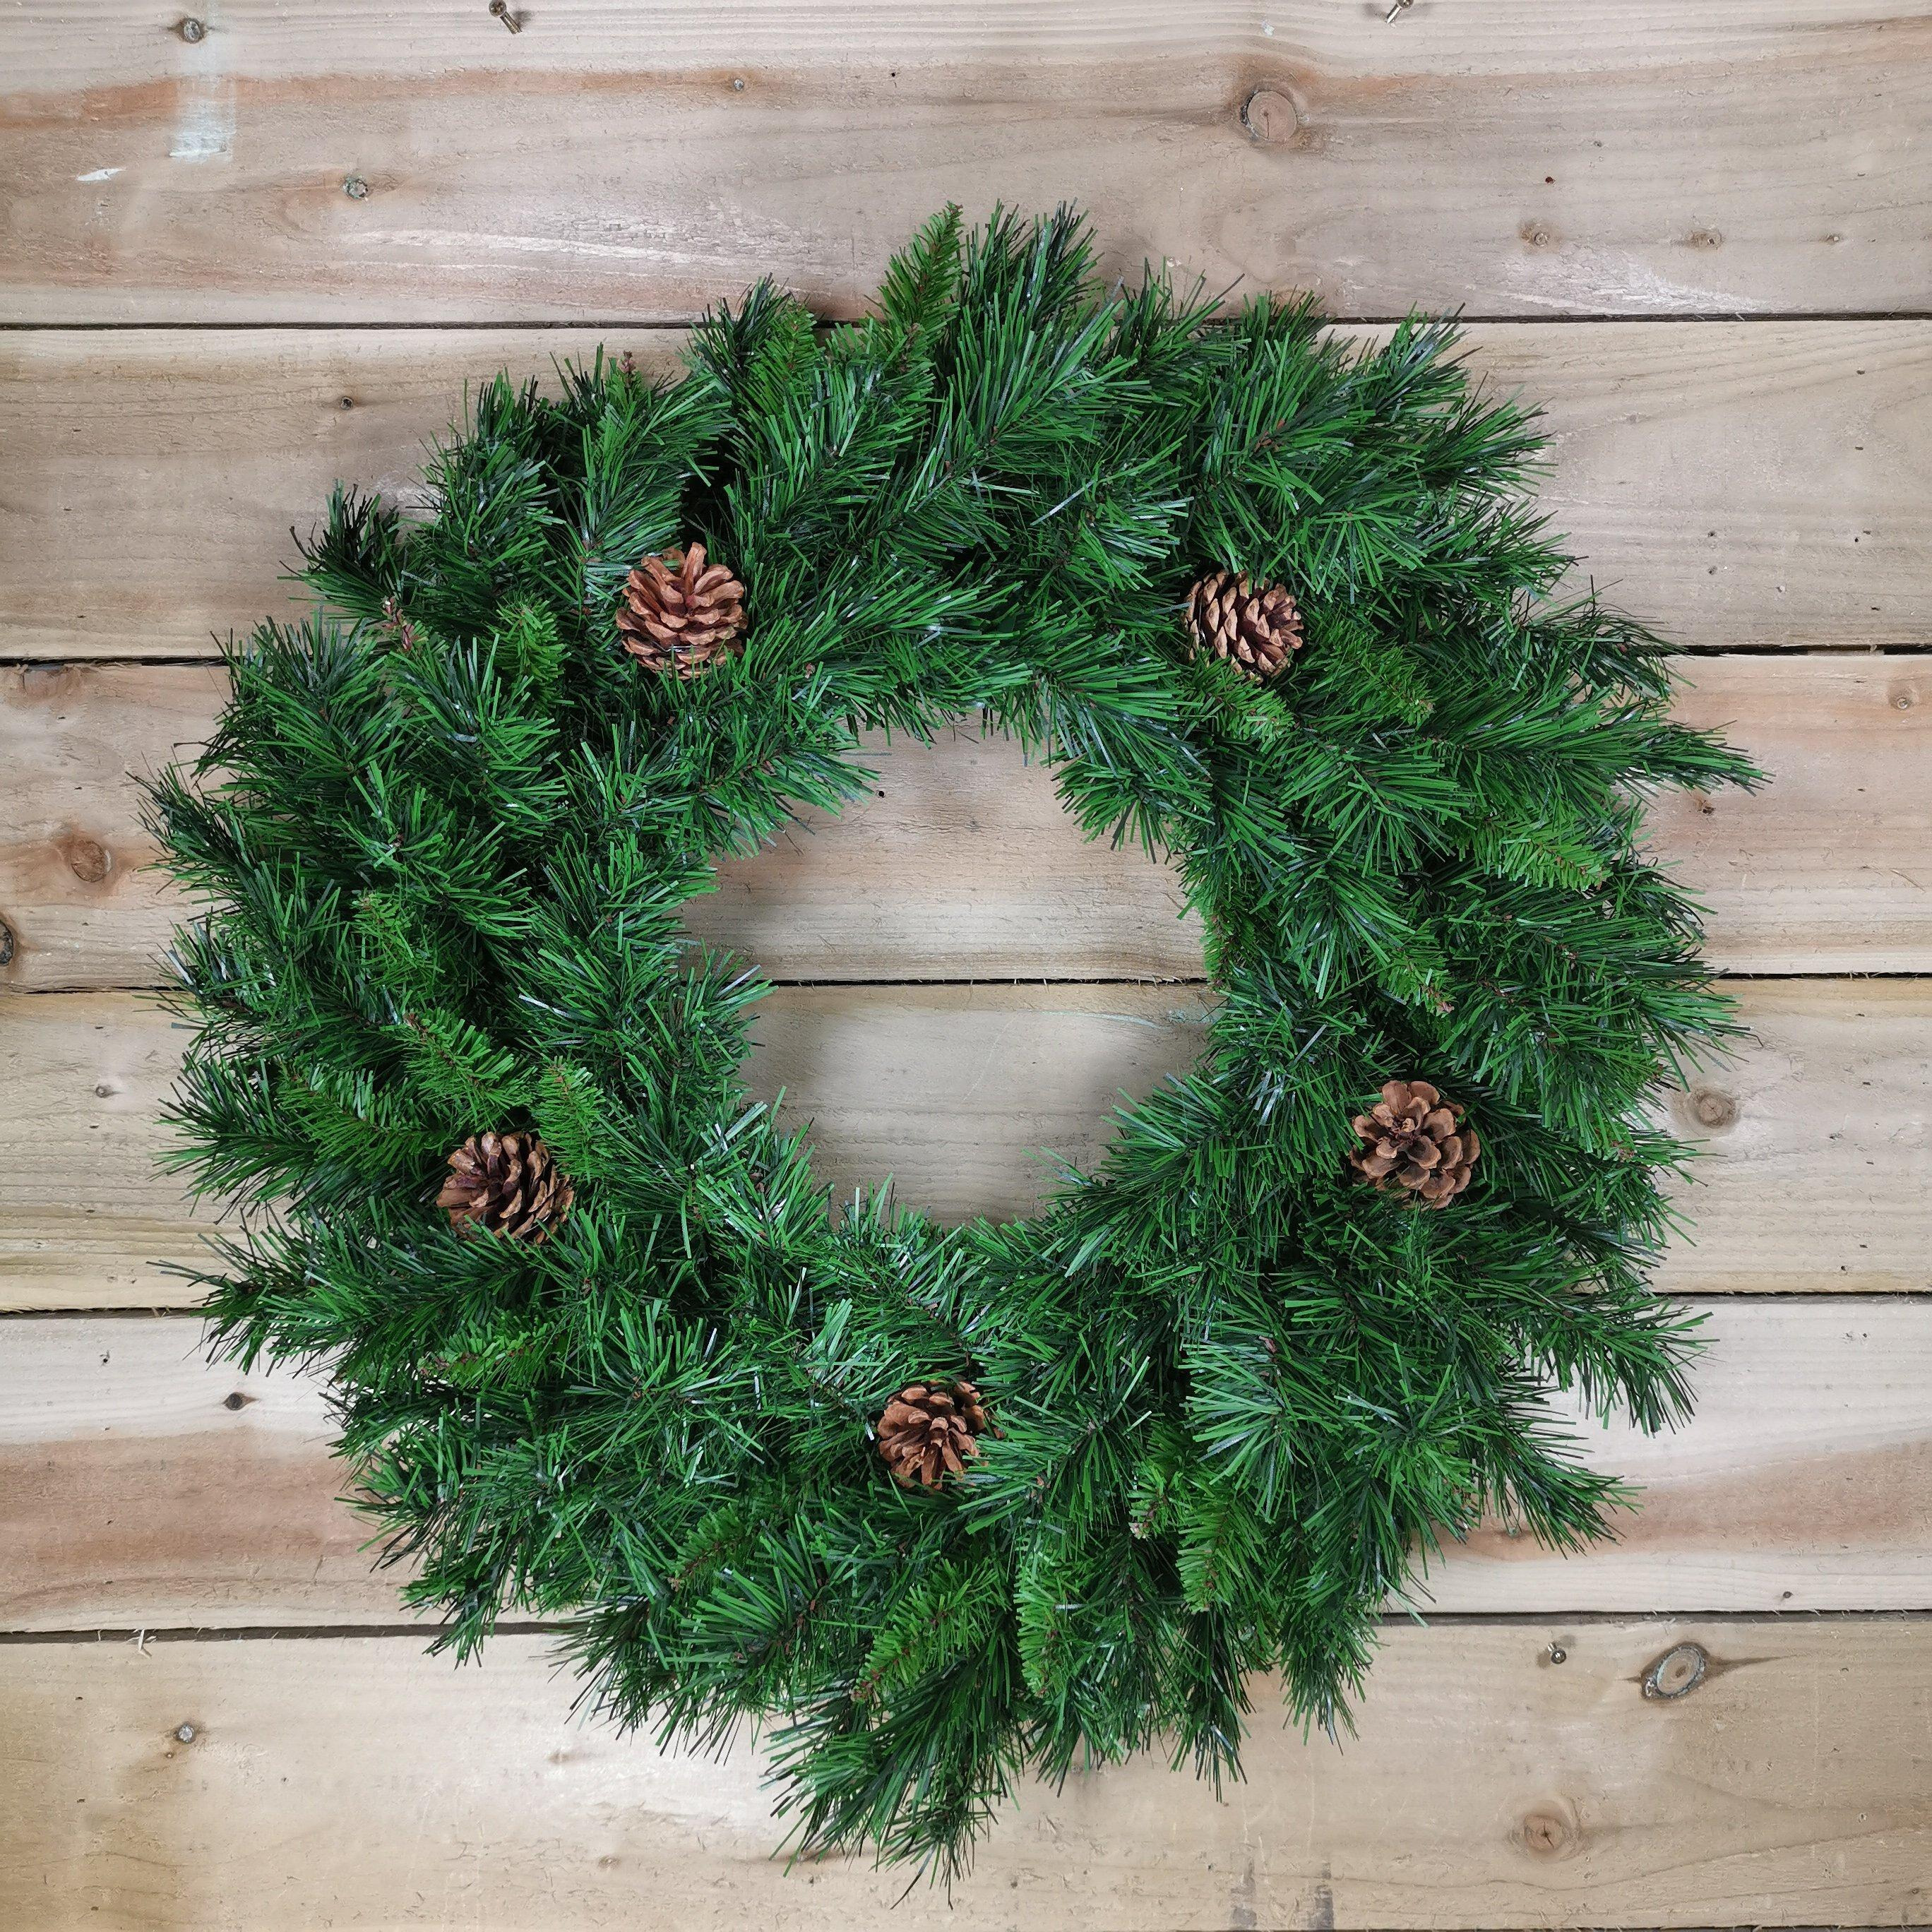 Christmas Snowtime Deluxe Princess Wreath Green With Pinecones - image 1